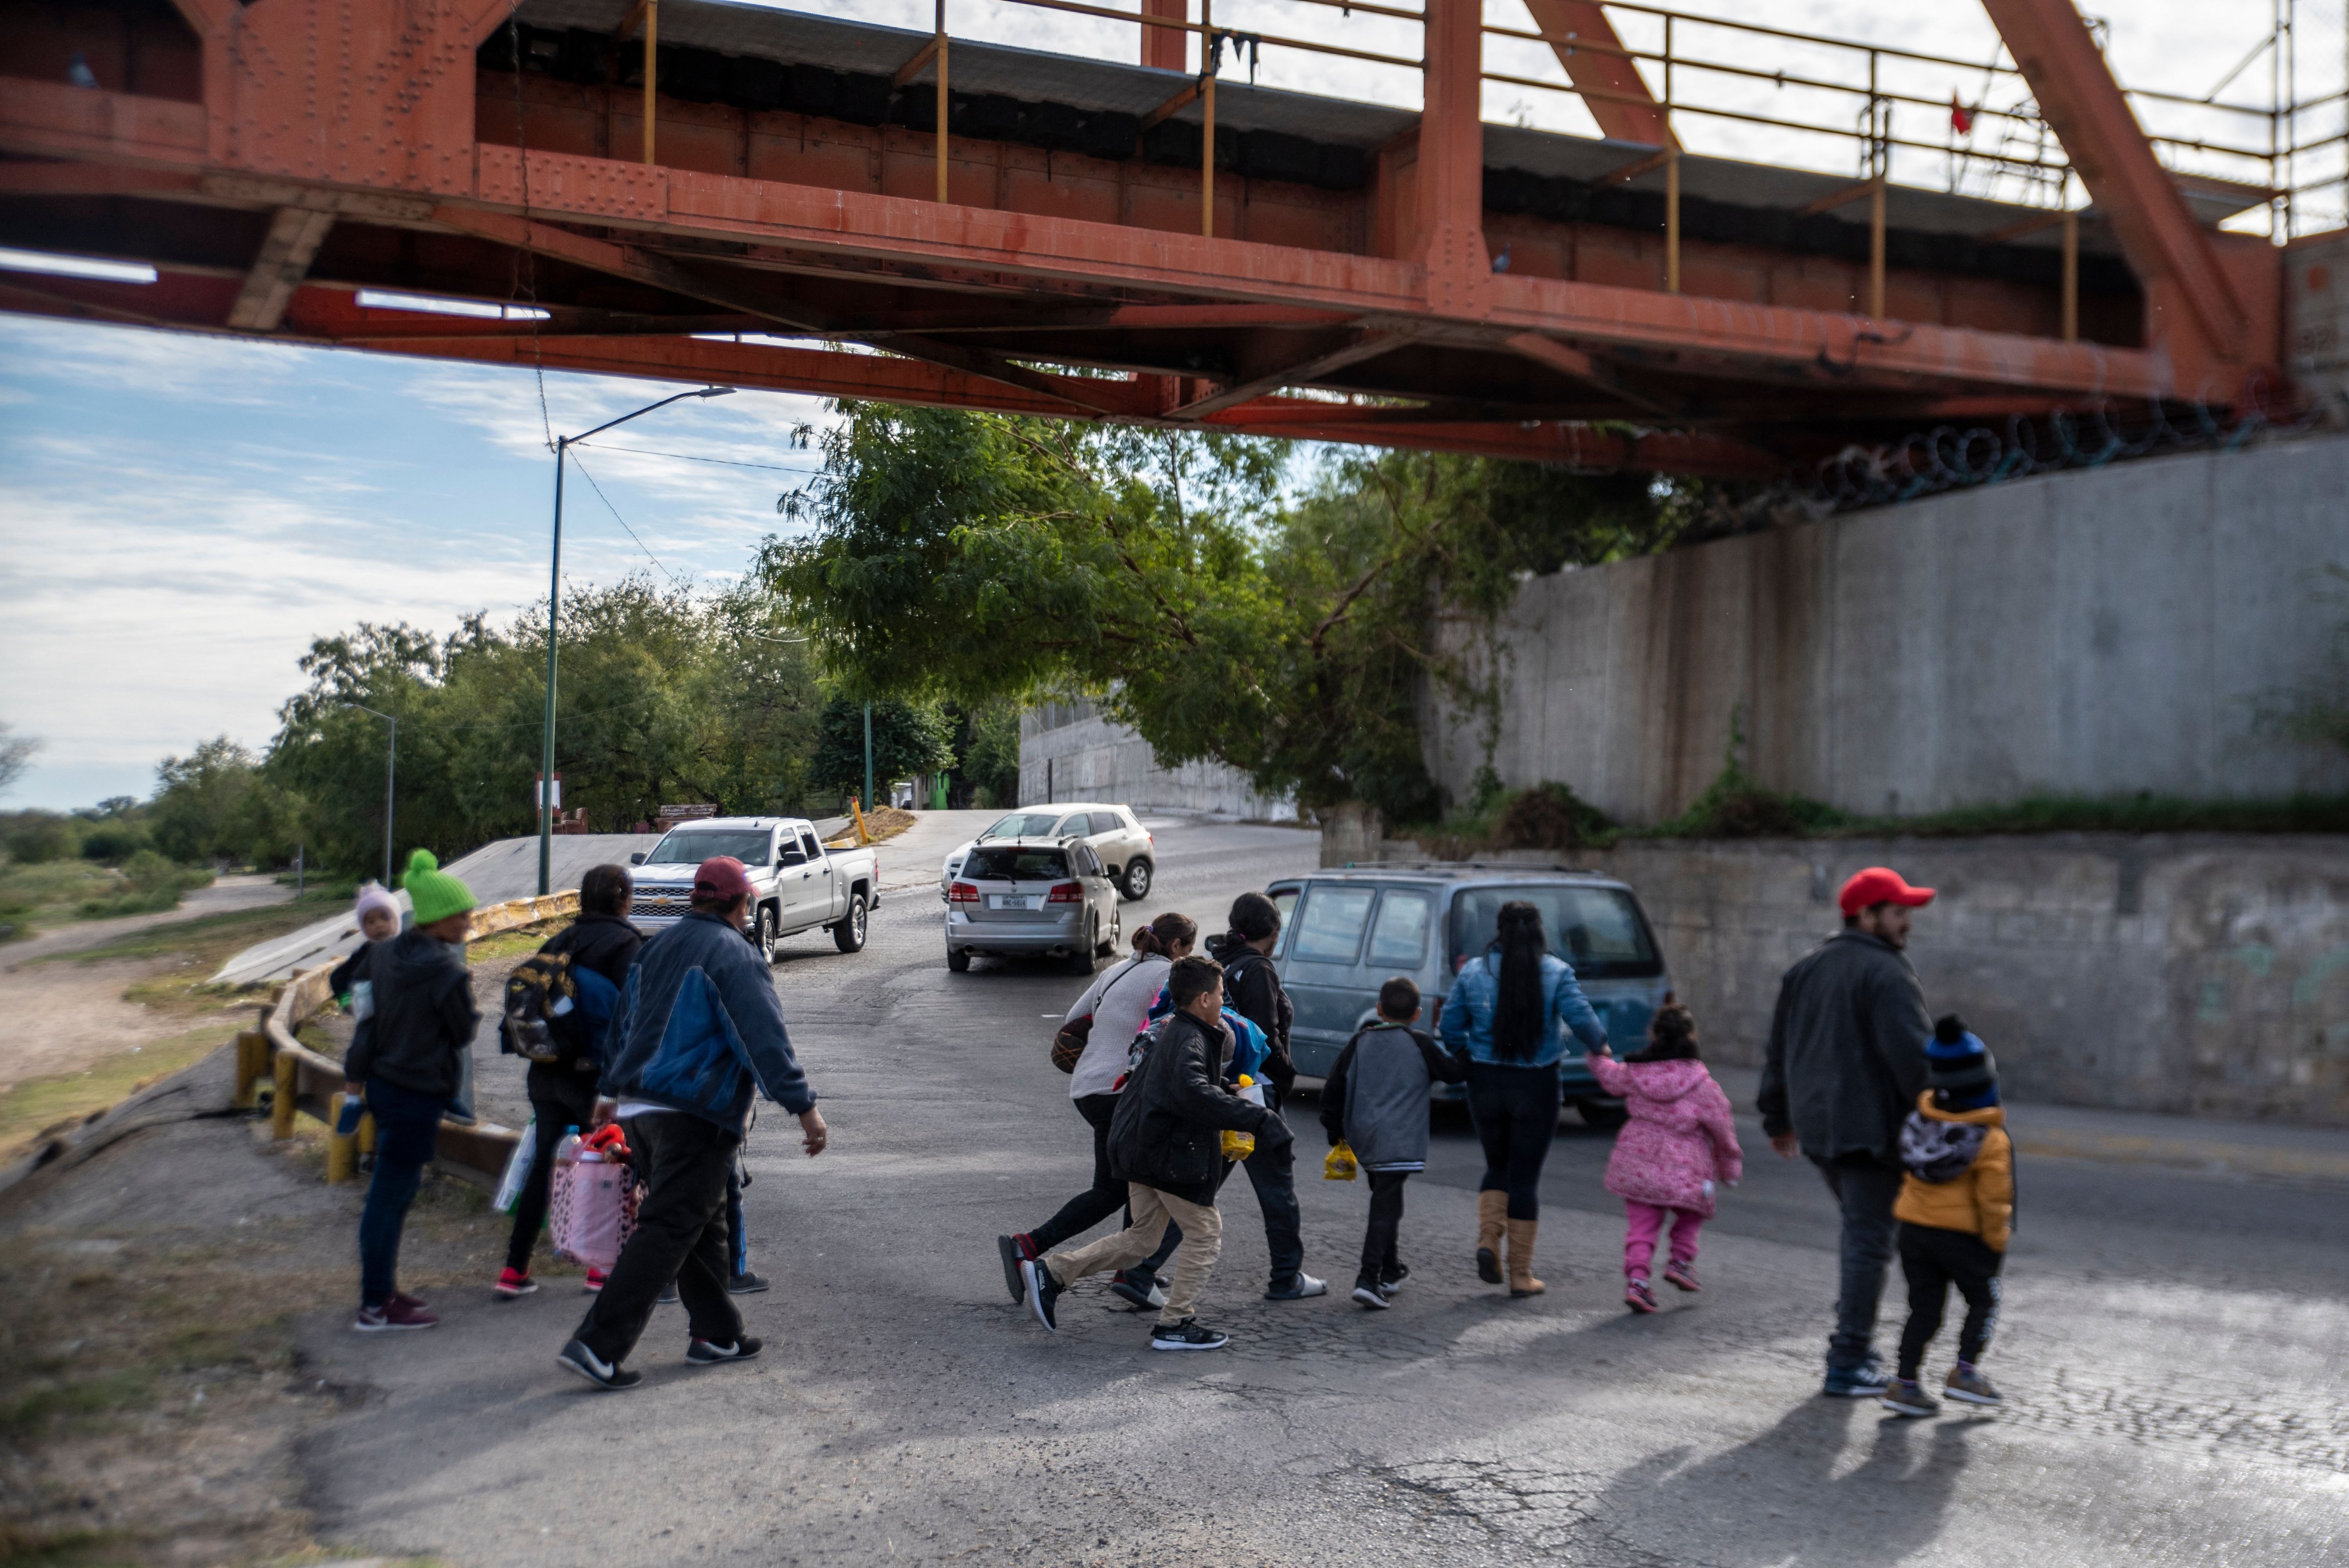 A group of migrants cross the street in Piedras Negras, Mexico on November 16, 2022. (Sergio Flores—AFP/Getty Images)